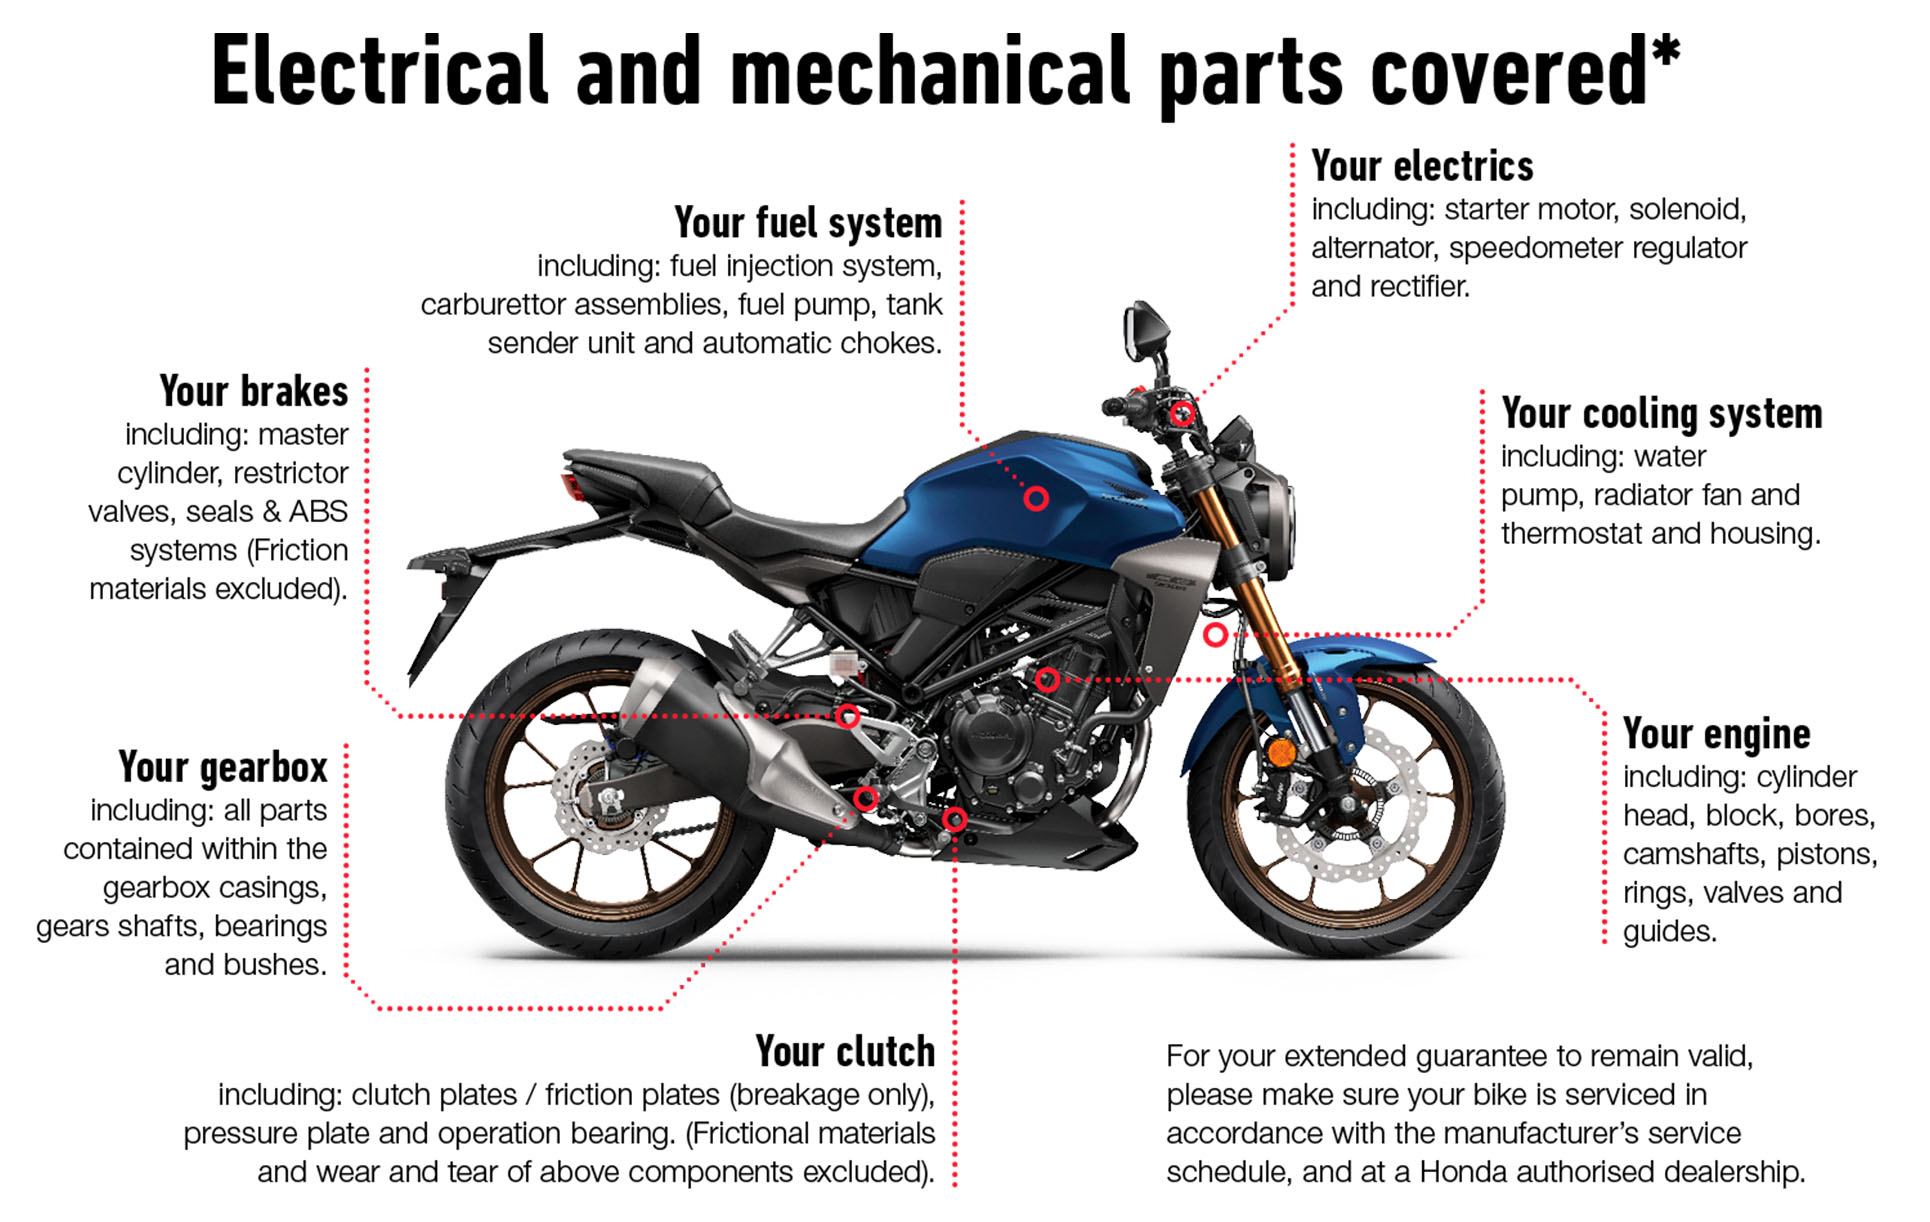 Electrical and mechanical parts covered by the Honda used bike guarantee